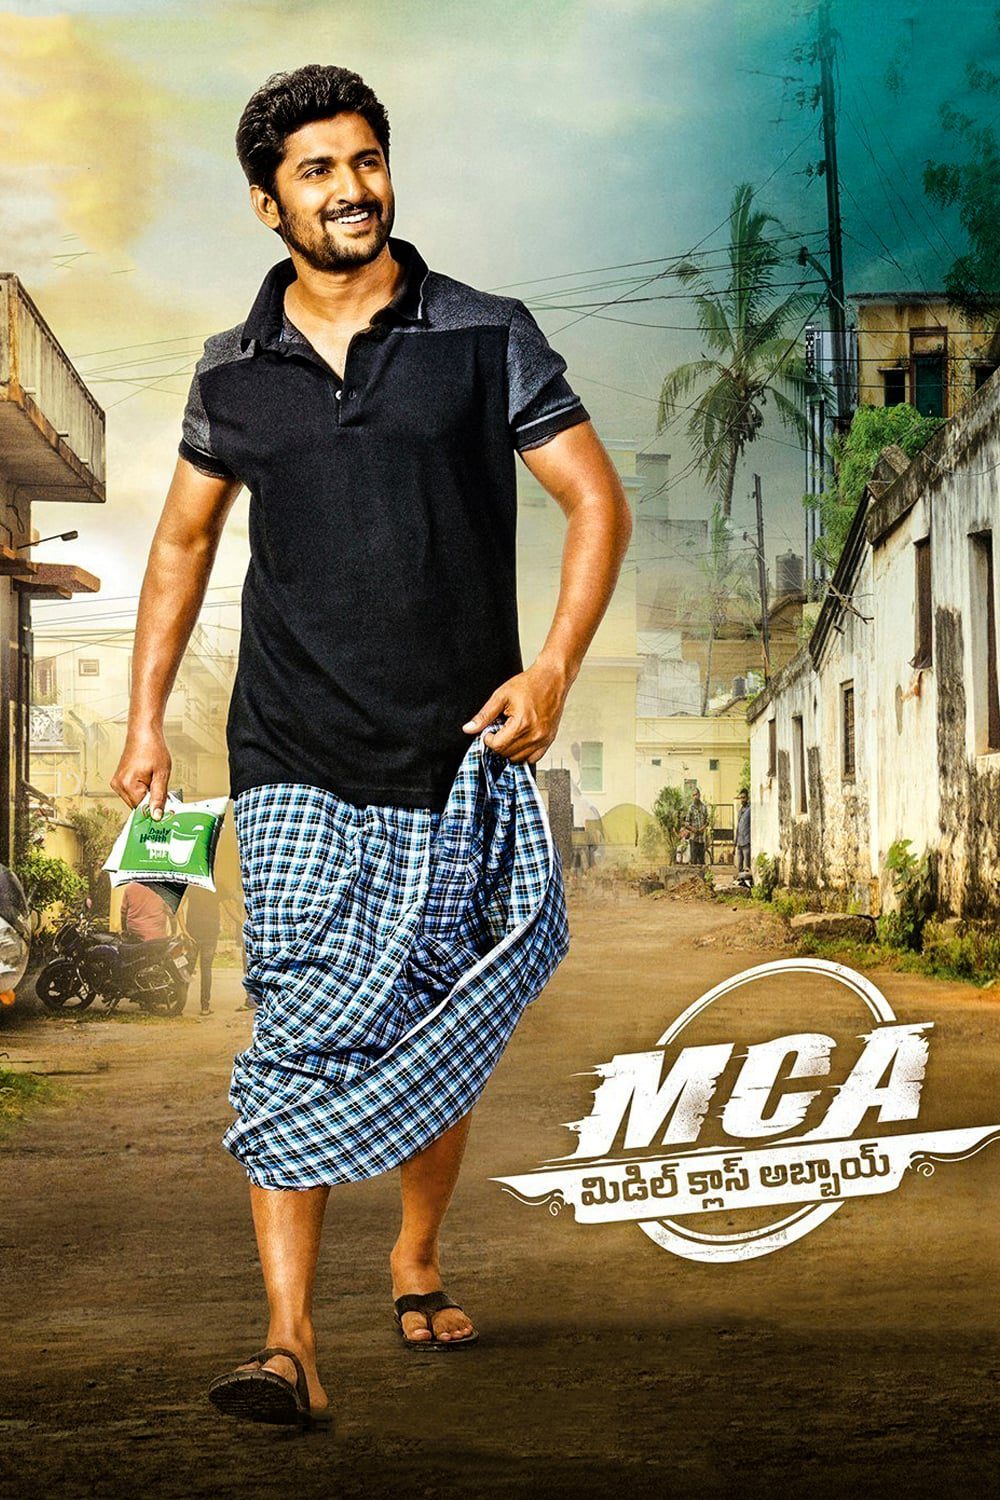 Poster for the movie "M.C.A"